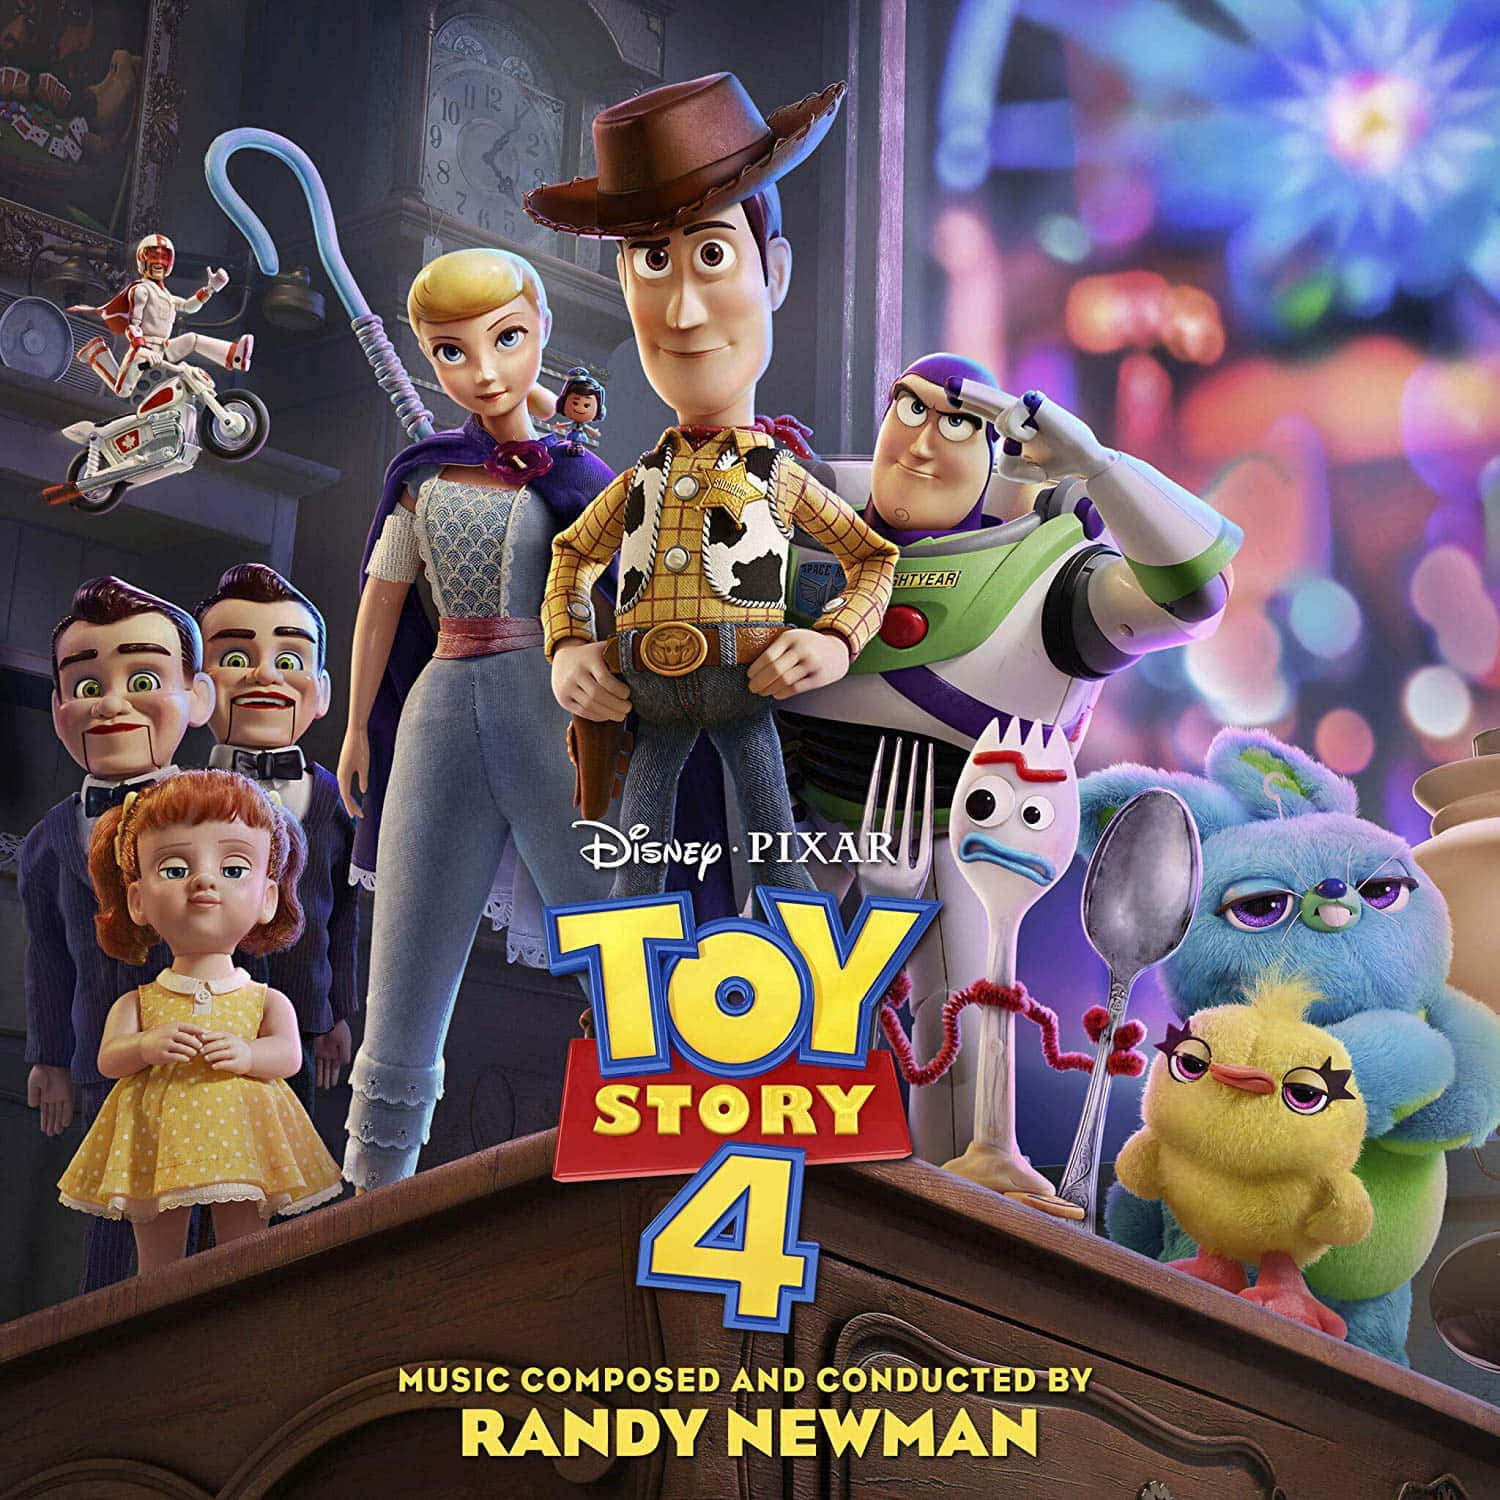 1.  Prepare to experience a masterpiece - Toy Story 4